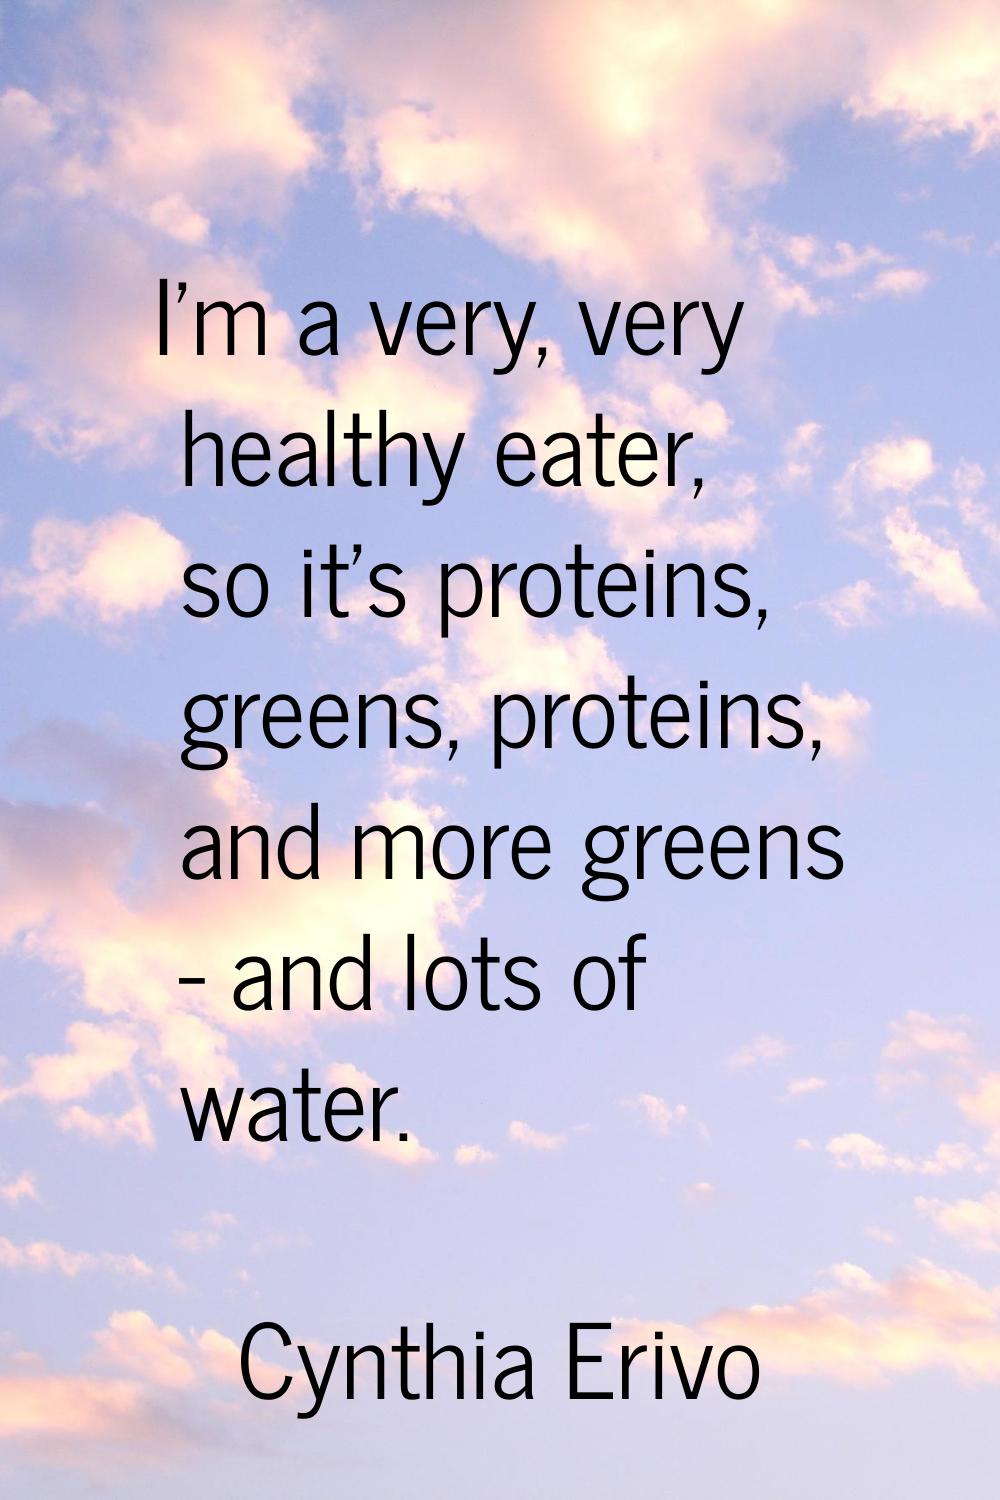 I'm a very, very healthy eater, so it's proteins, greens, proteins, and more greens - and lots of w